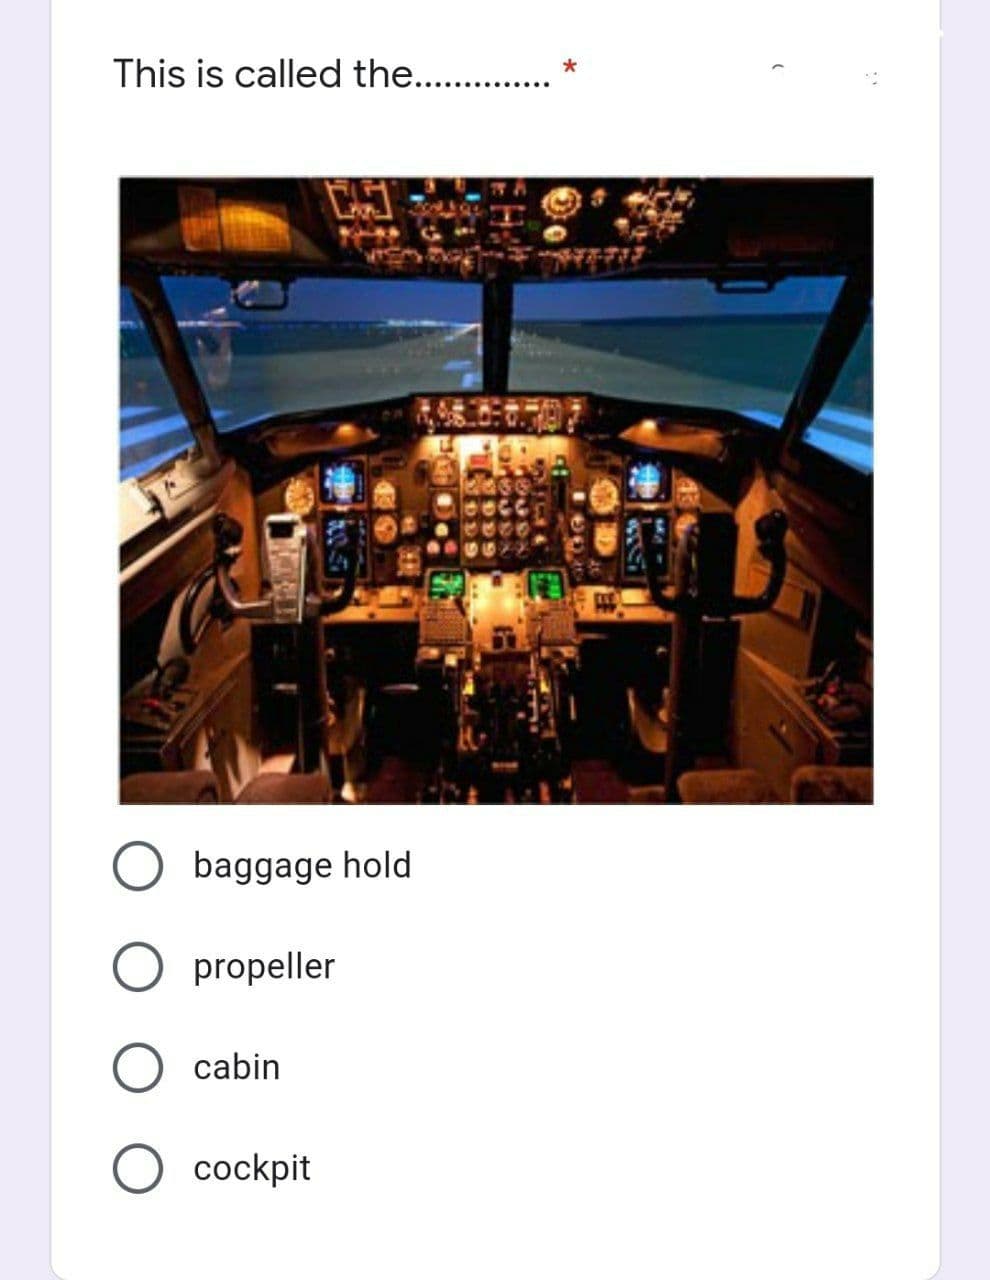 This is called the...
baggage hold
propeller
cabin
cockpit
